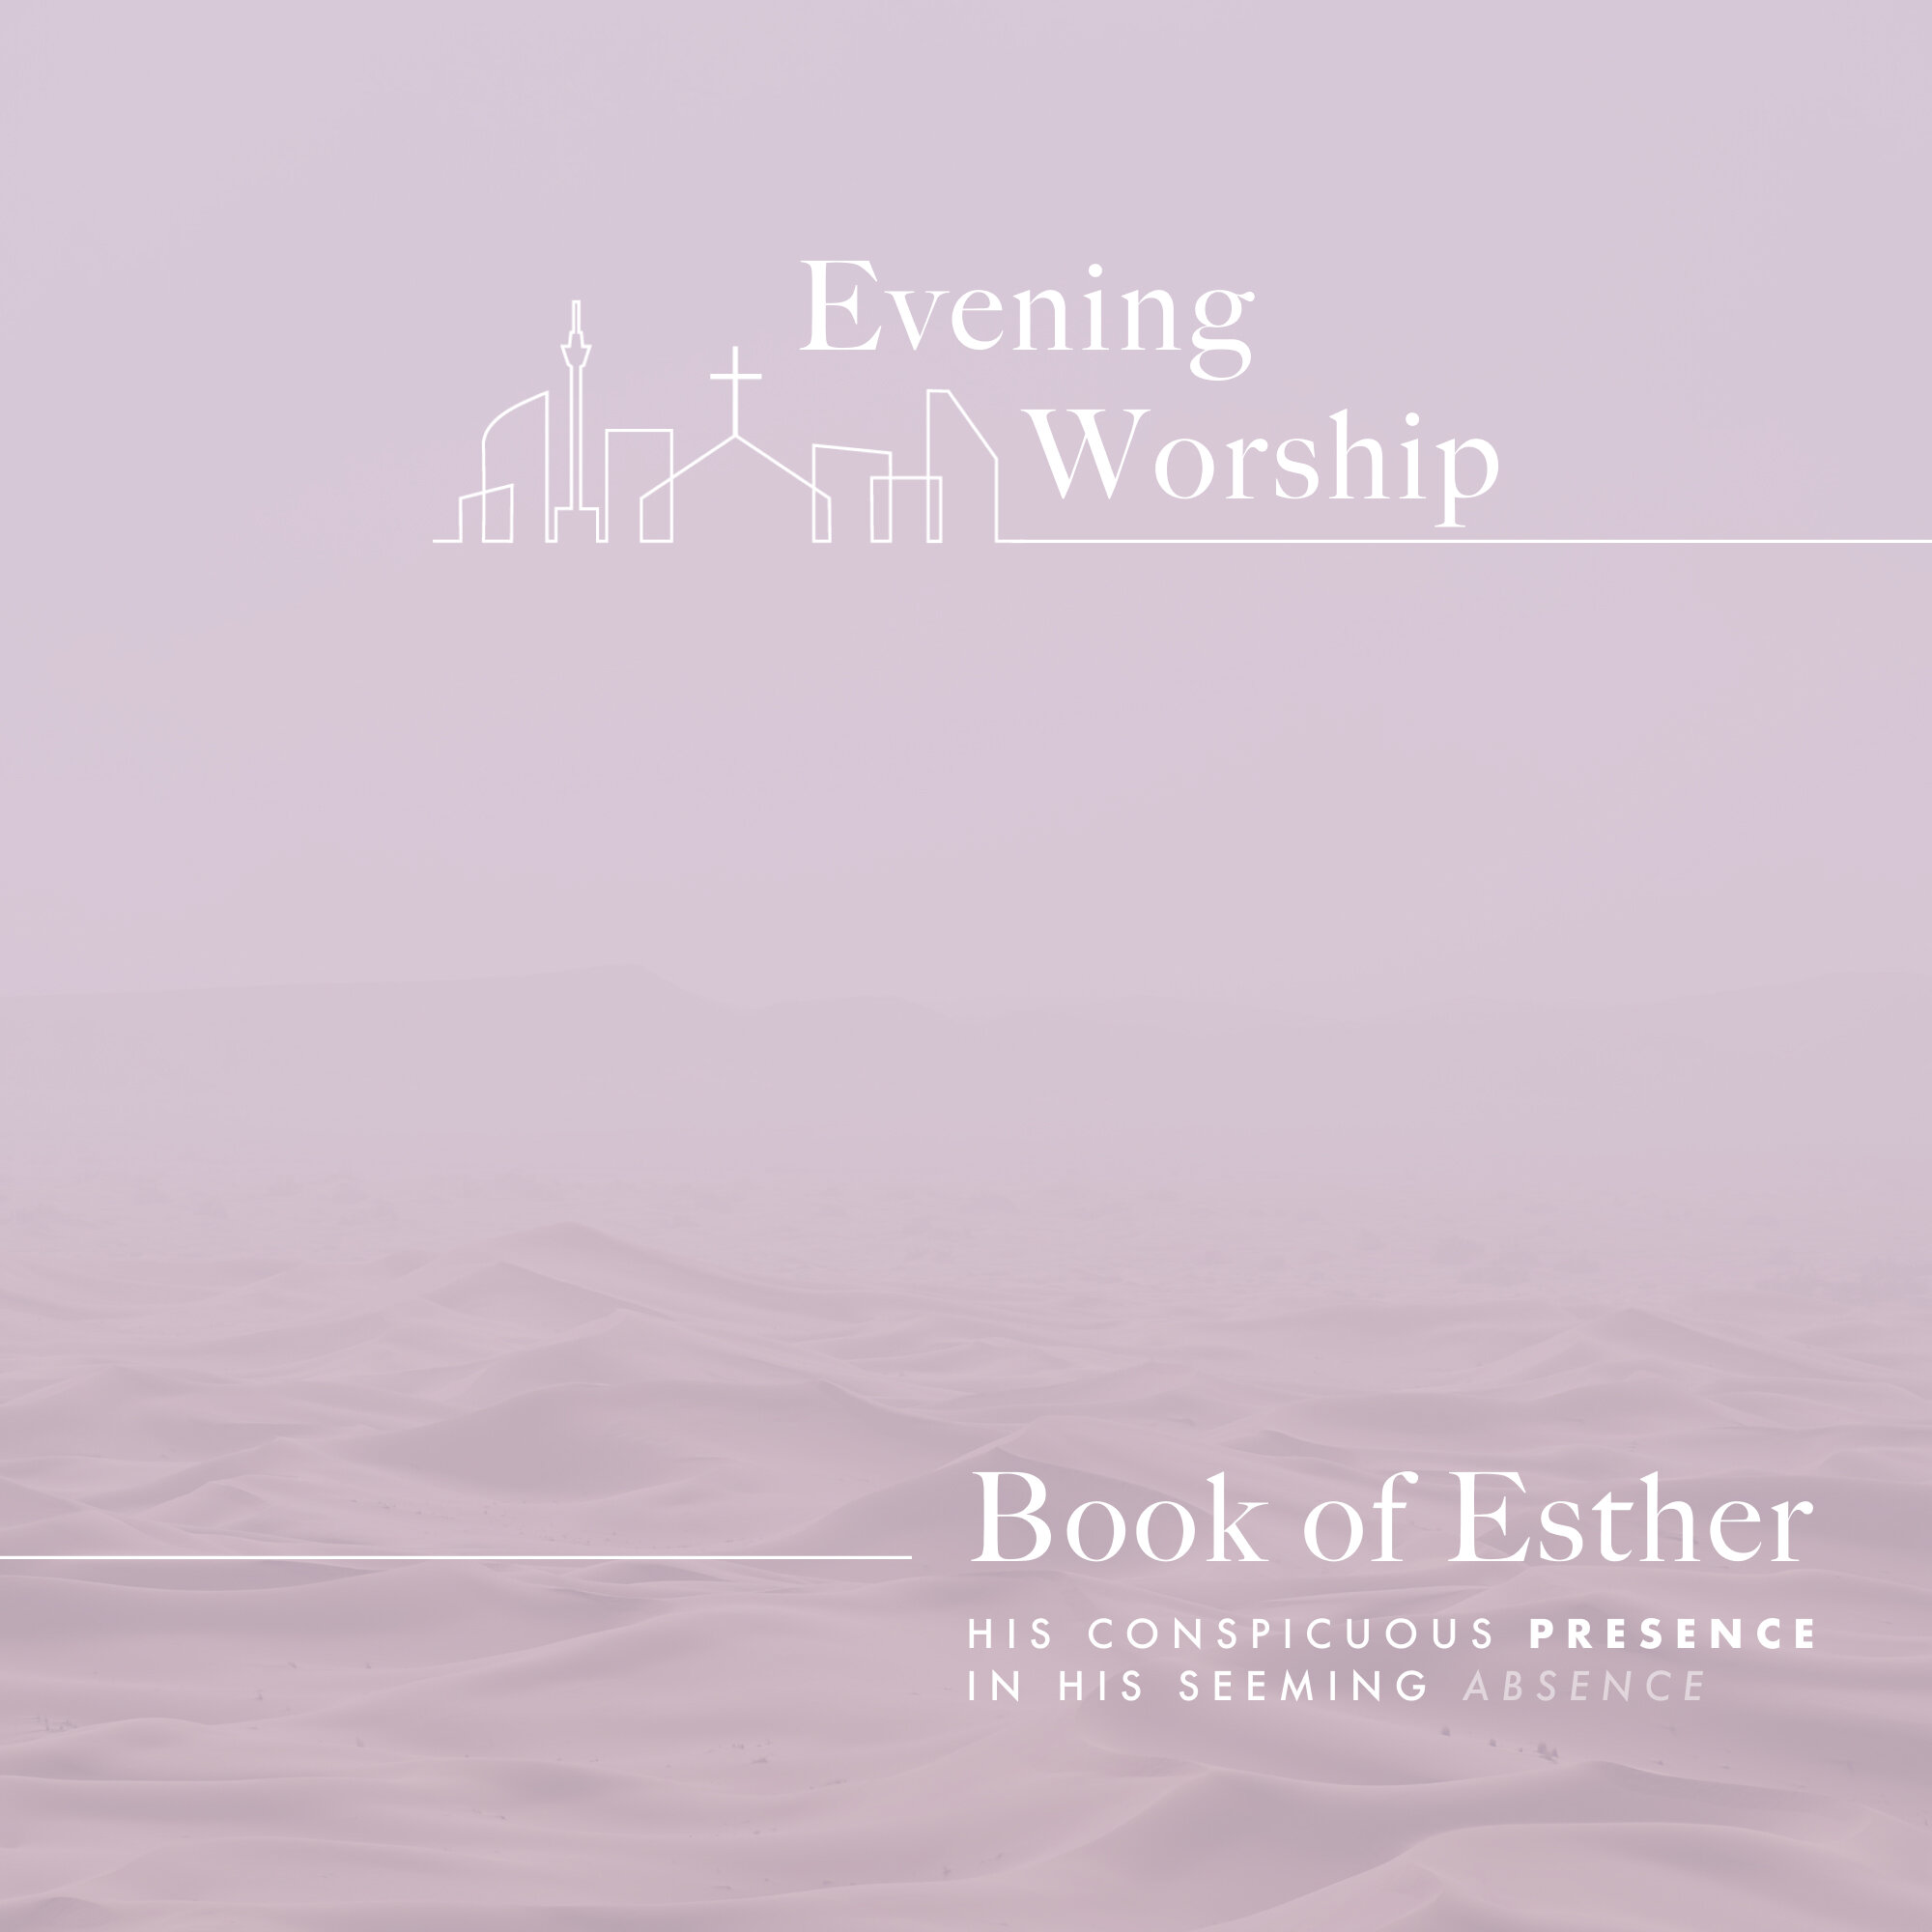 📖 Evening Service Sermon Series 📖 
SLHCC's Evening Service will be commencing a new sermon series &quot;Book of Esther: His Conspicuous Presence in His Seeming Absence&quot;. We invite you to join our evening congregation as we continue to meet at 